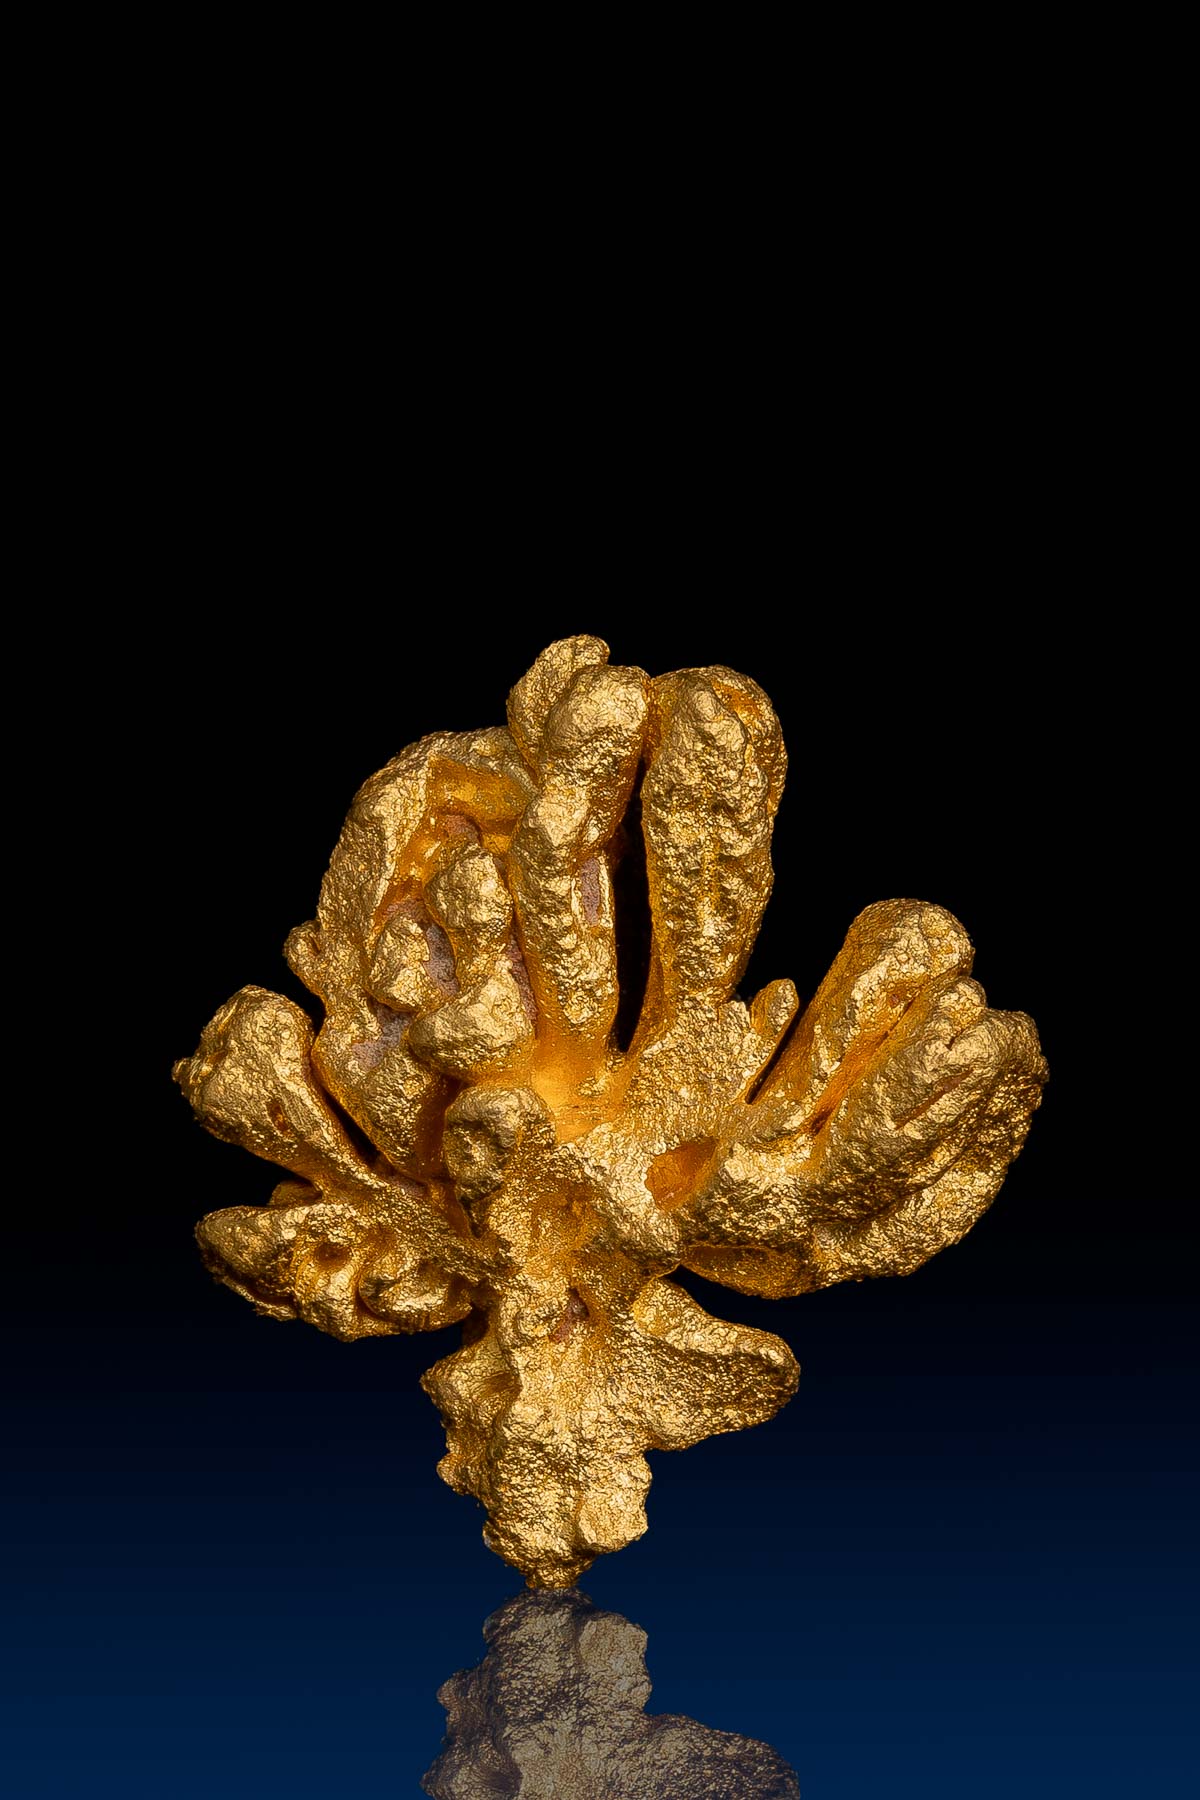 "Clover" Shaped Natural Gold Nugget Crystal from Brazil